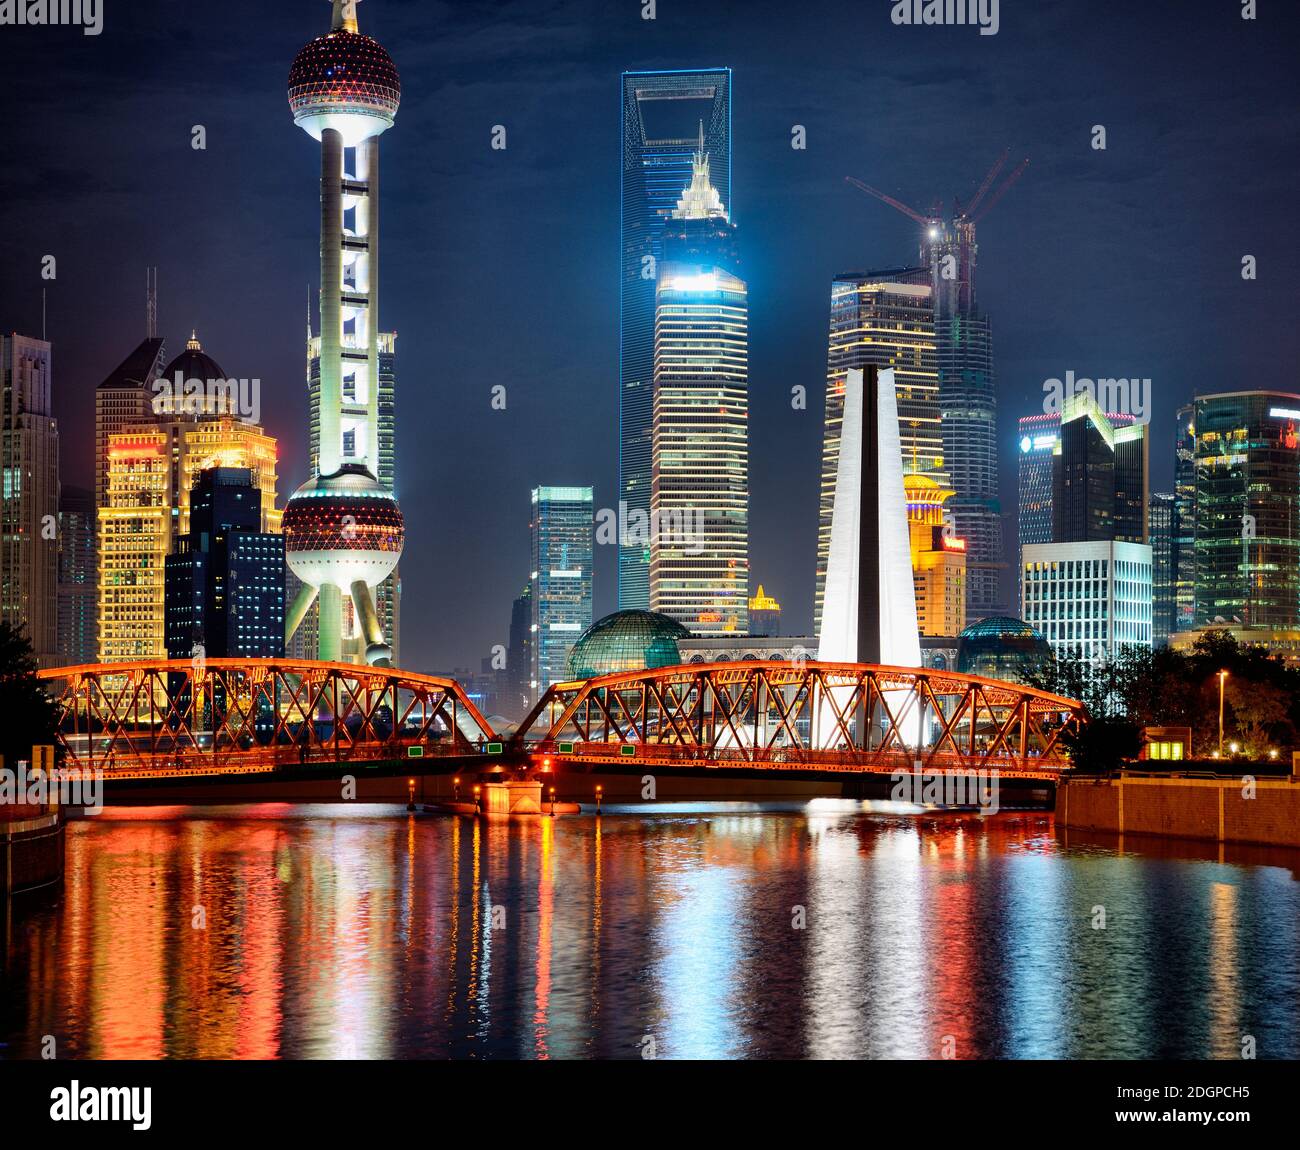 Nocturne view at Pudong with Oriental Pearl Tower, Financial and Jin Mao towers. In foreground illuminated bridge reflection in Suzhou Creek water. Stock Photo